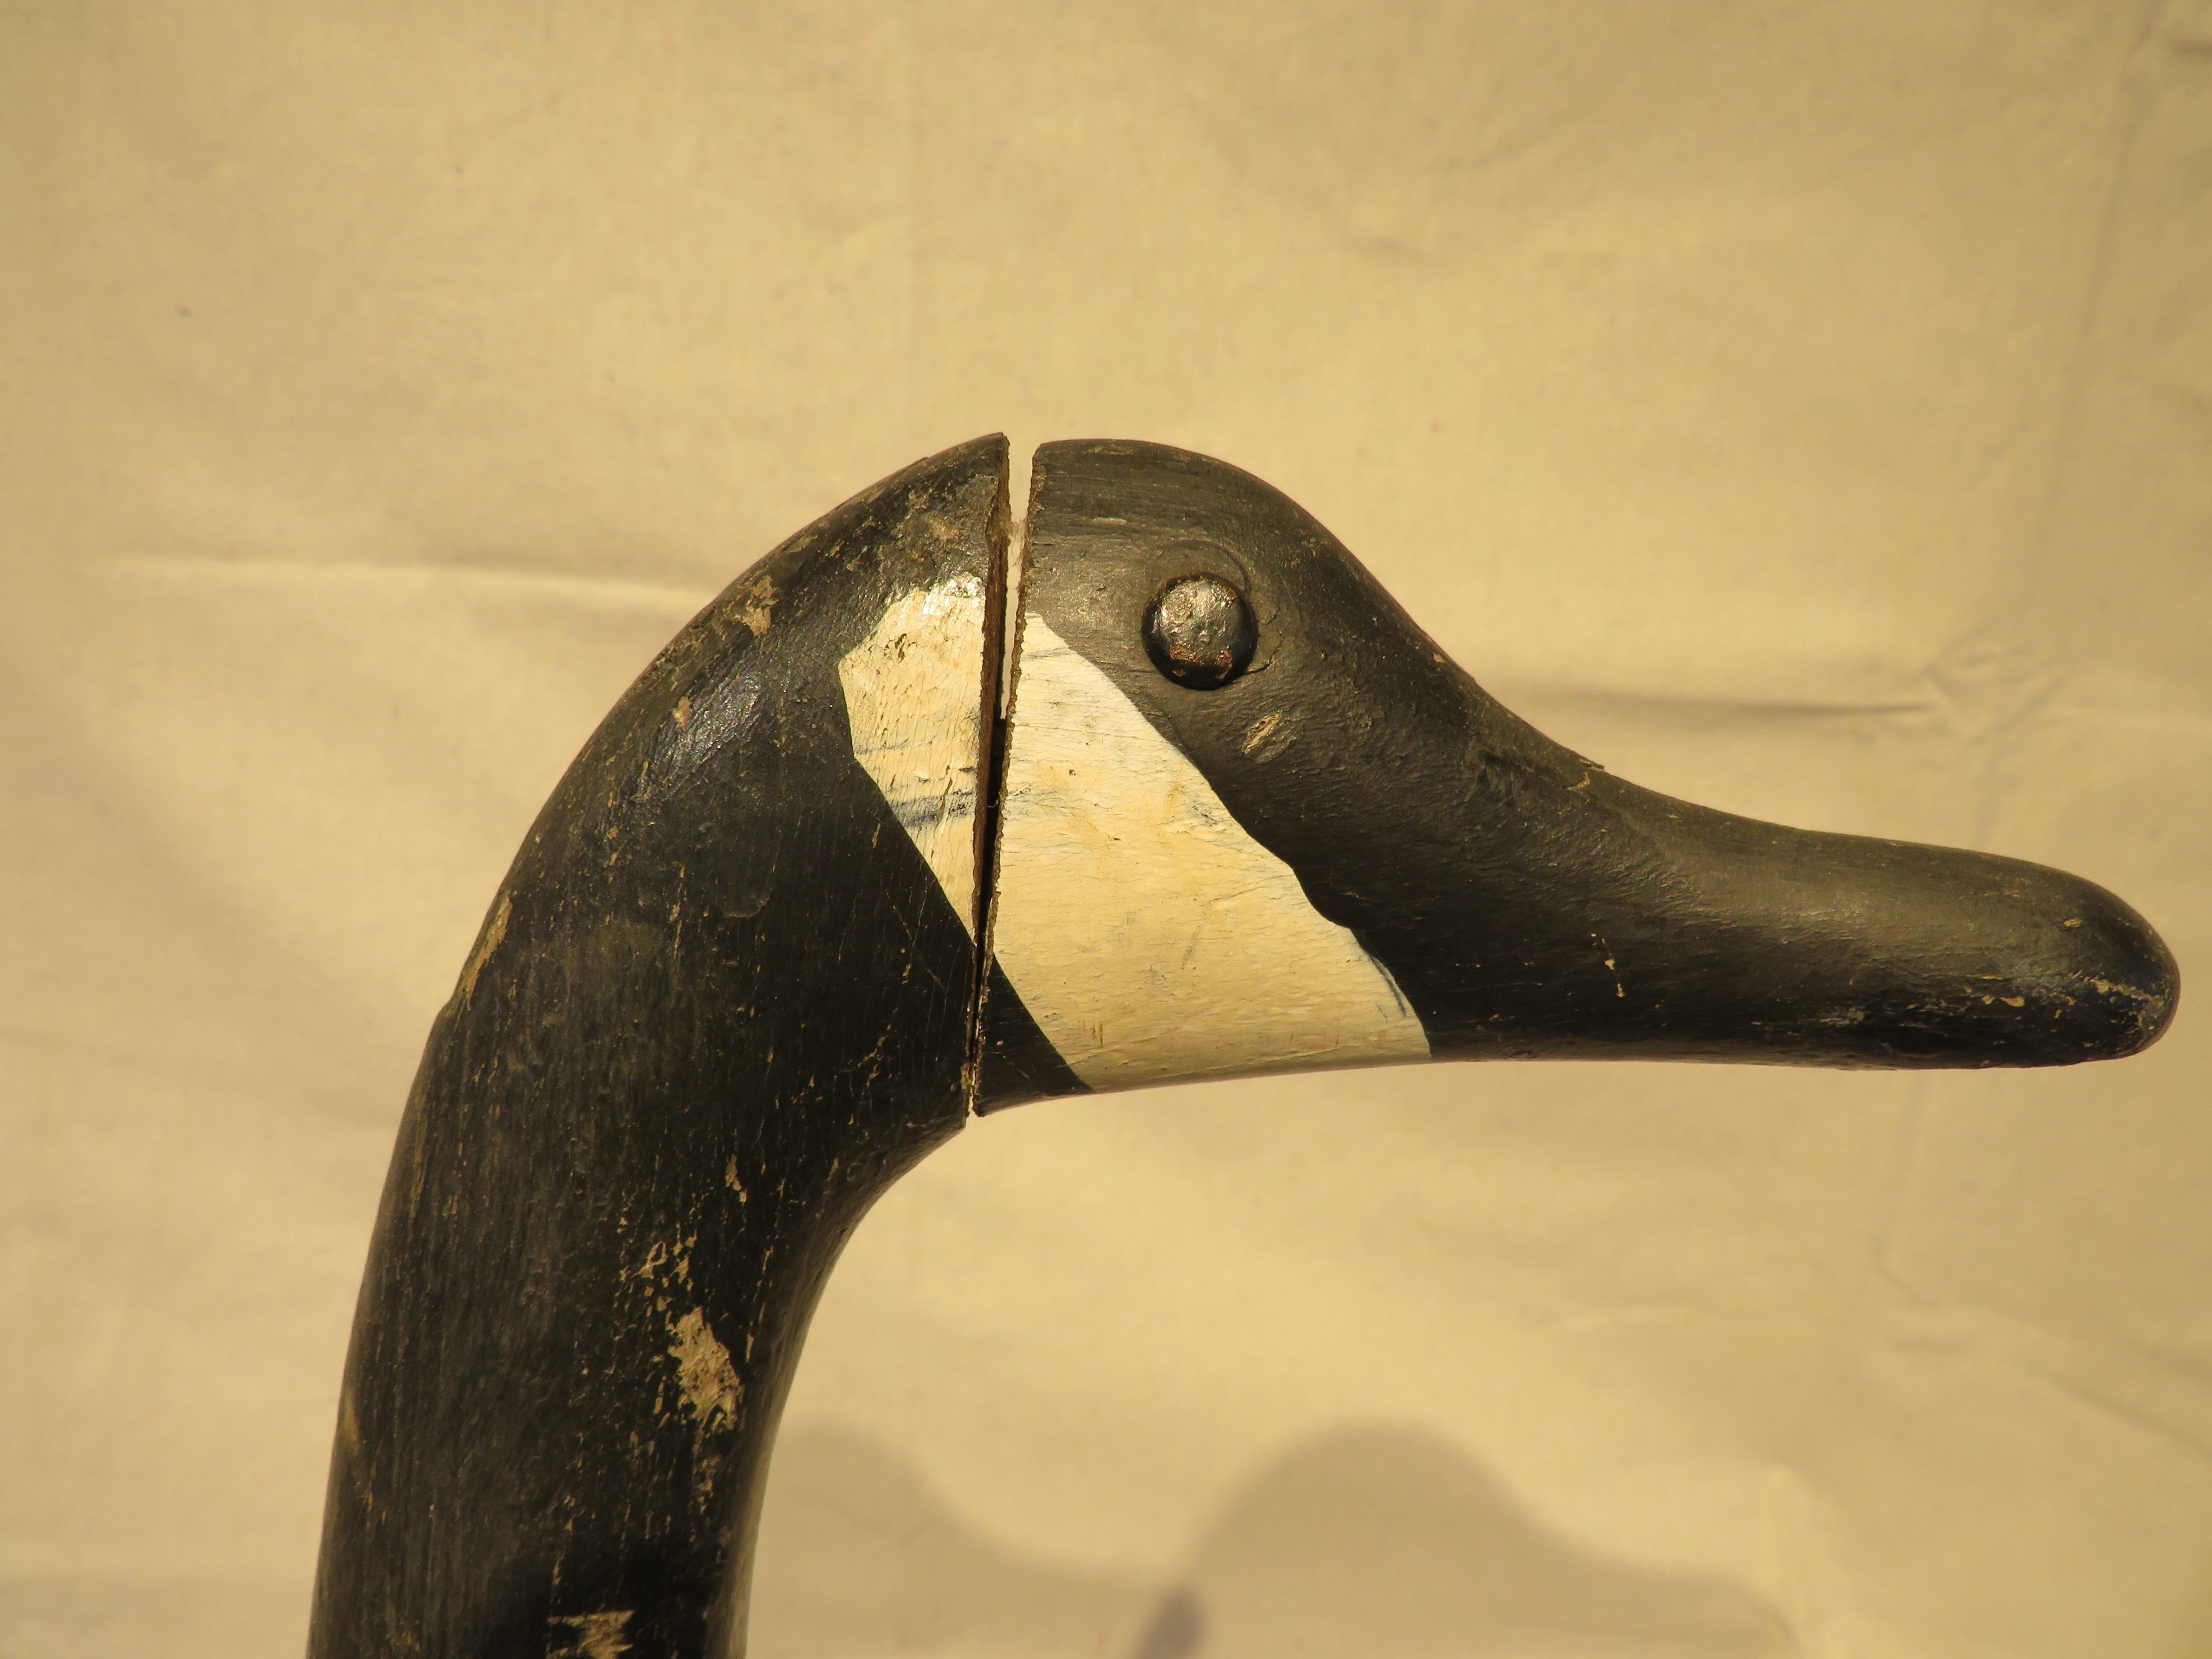 Vintage Canada standing Goose Decoy on bent nail legs, by carver of birds and working decoys William 